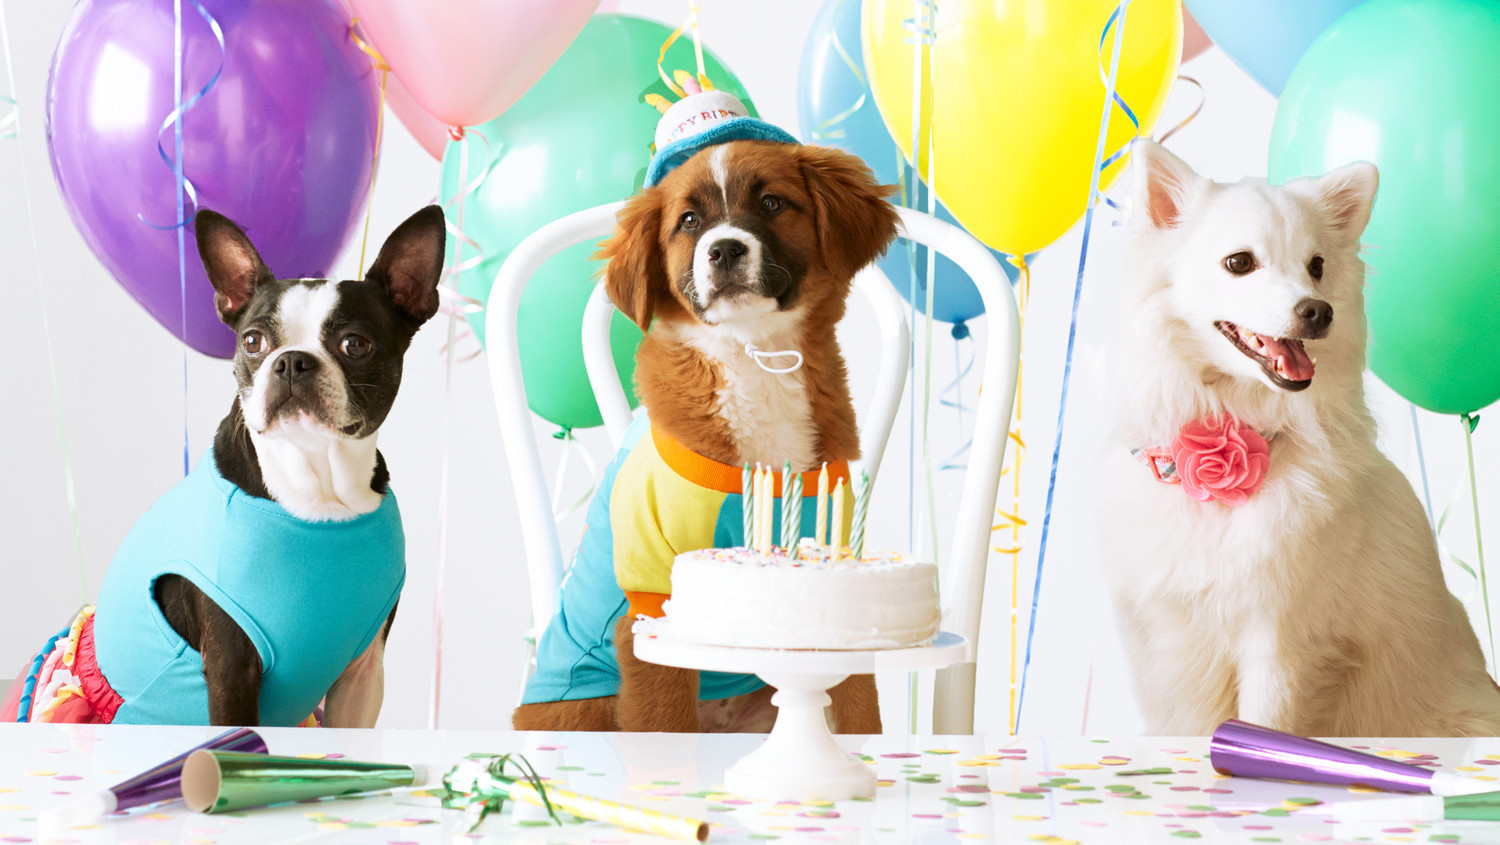 Dog Birthday Decorations
 This Kindhearted Boy Invited Local Shelter Dogs to His